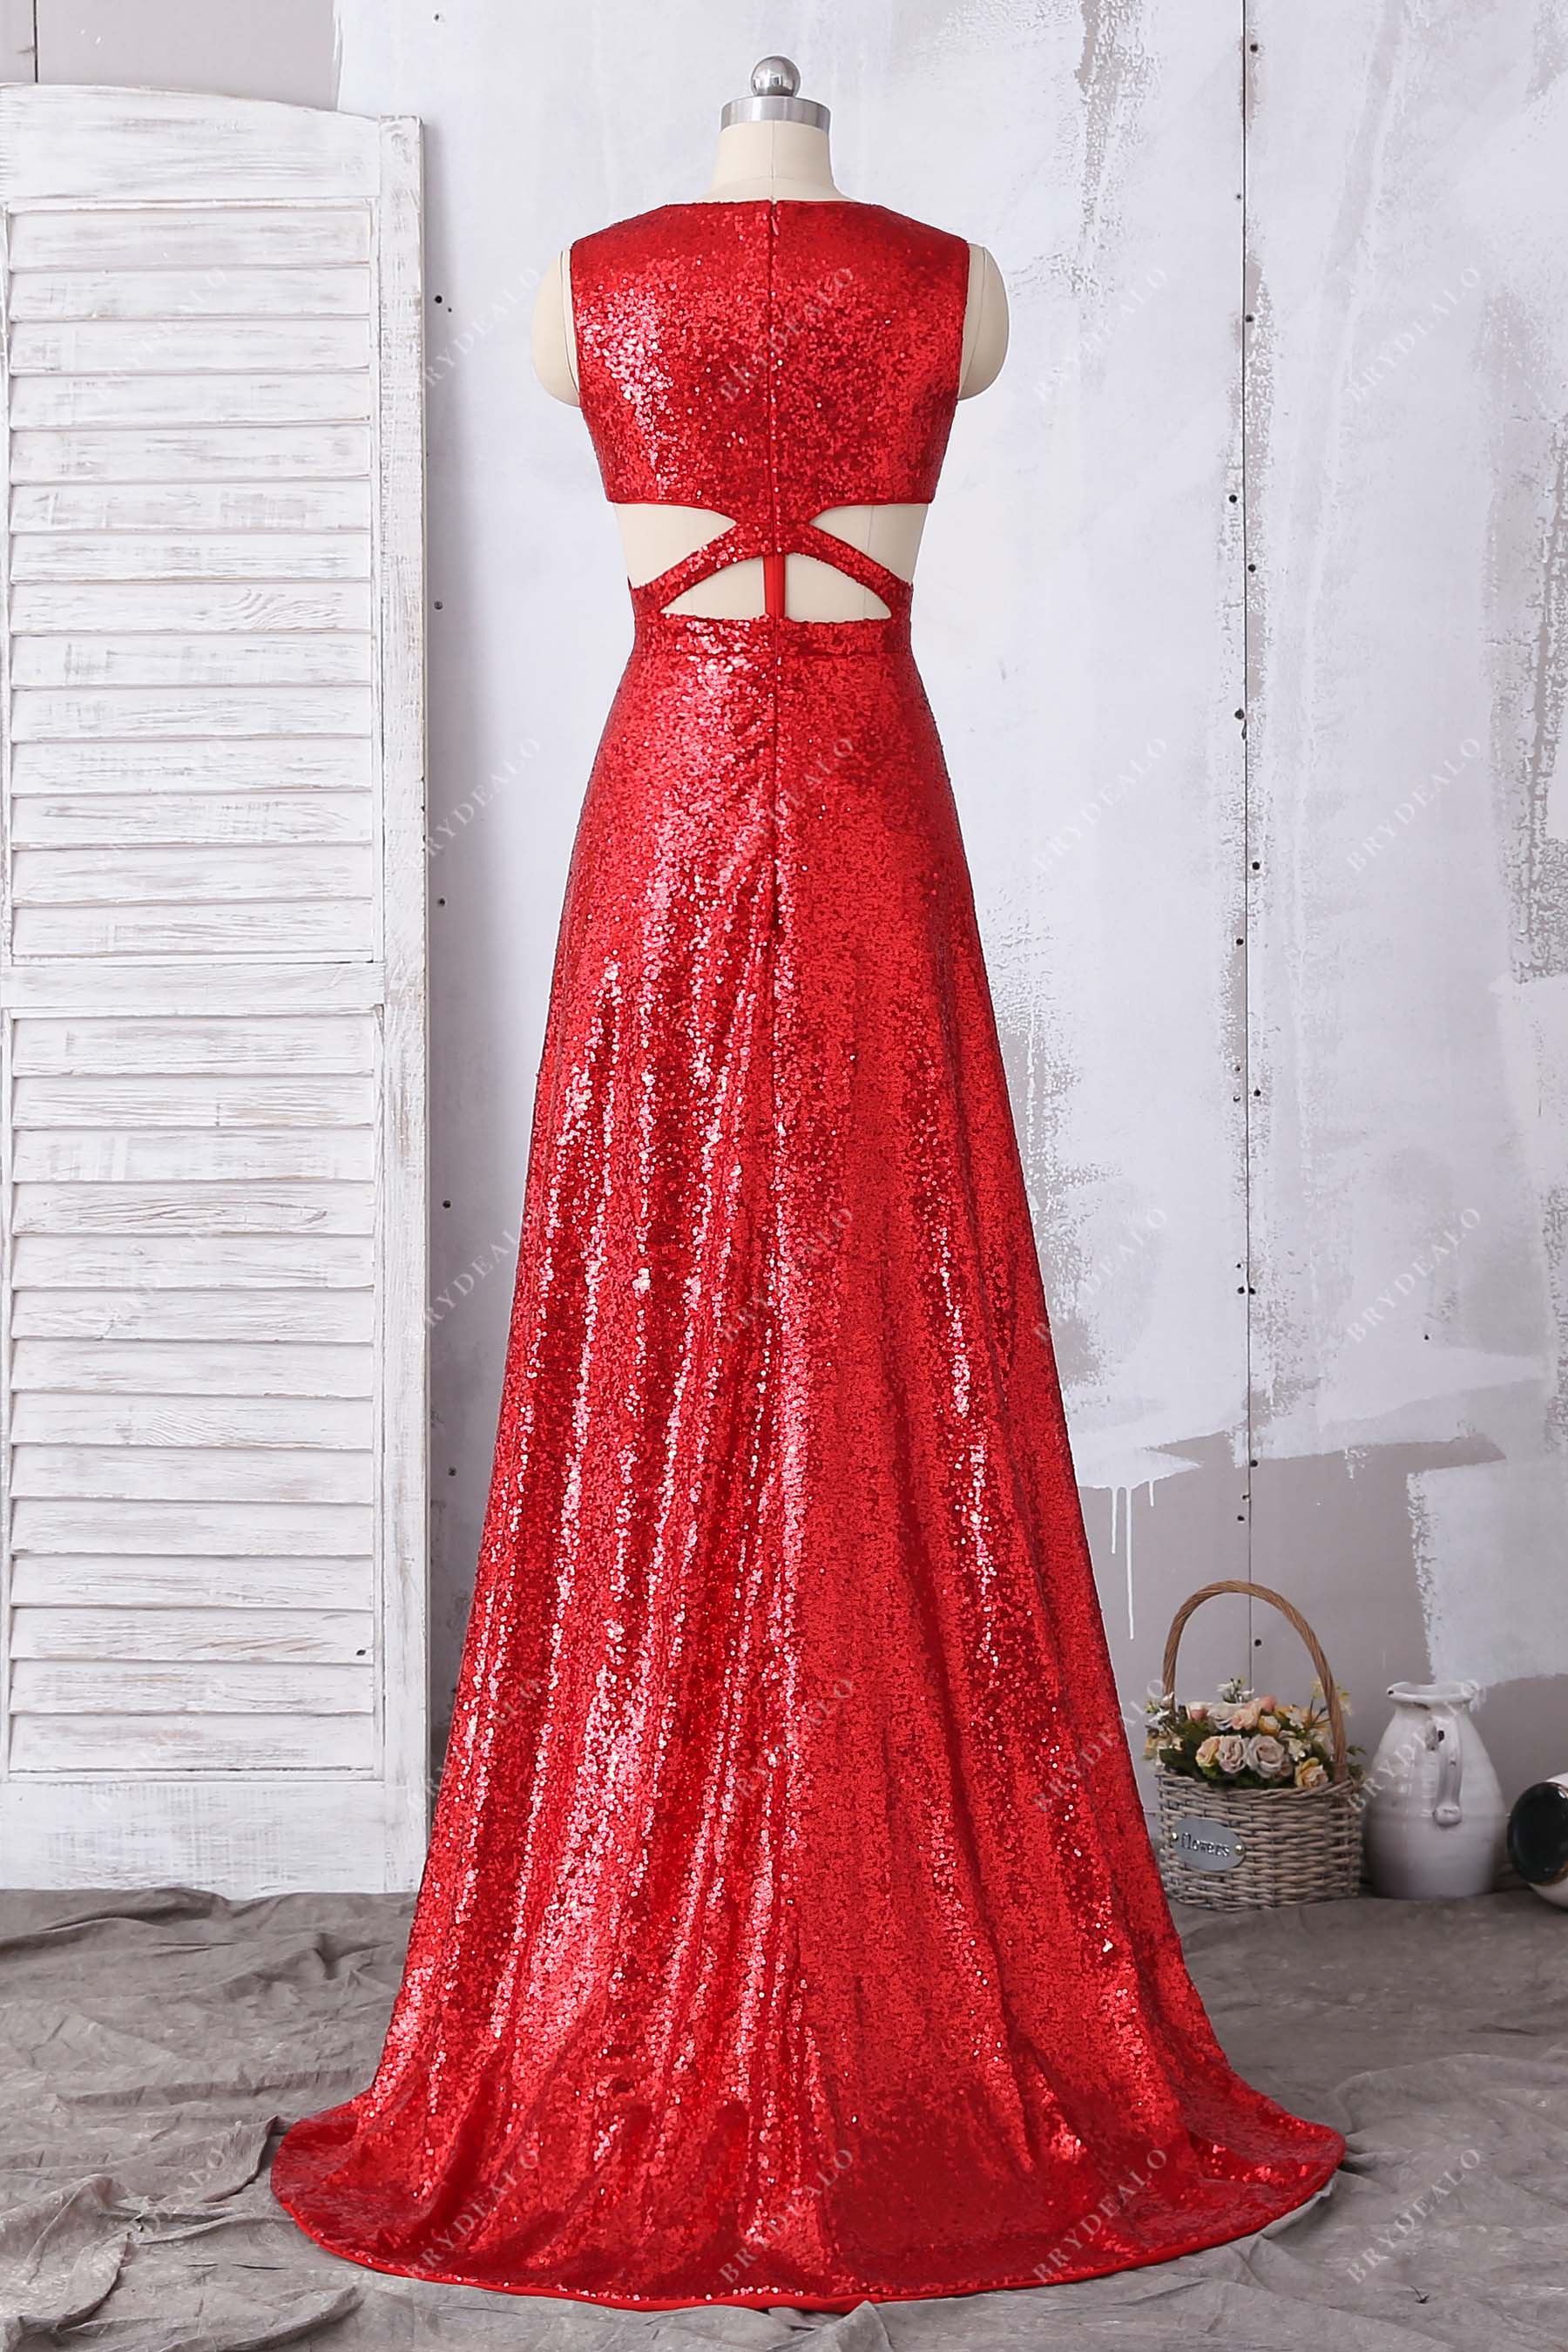 Red sleeveless wedding gown | Sleeveless wedding gown, Party wear gown,  Anarkali gown receptions